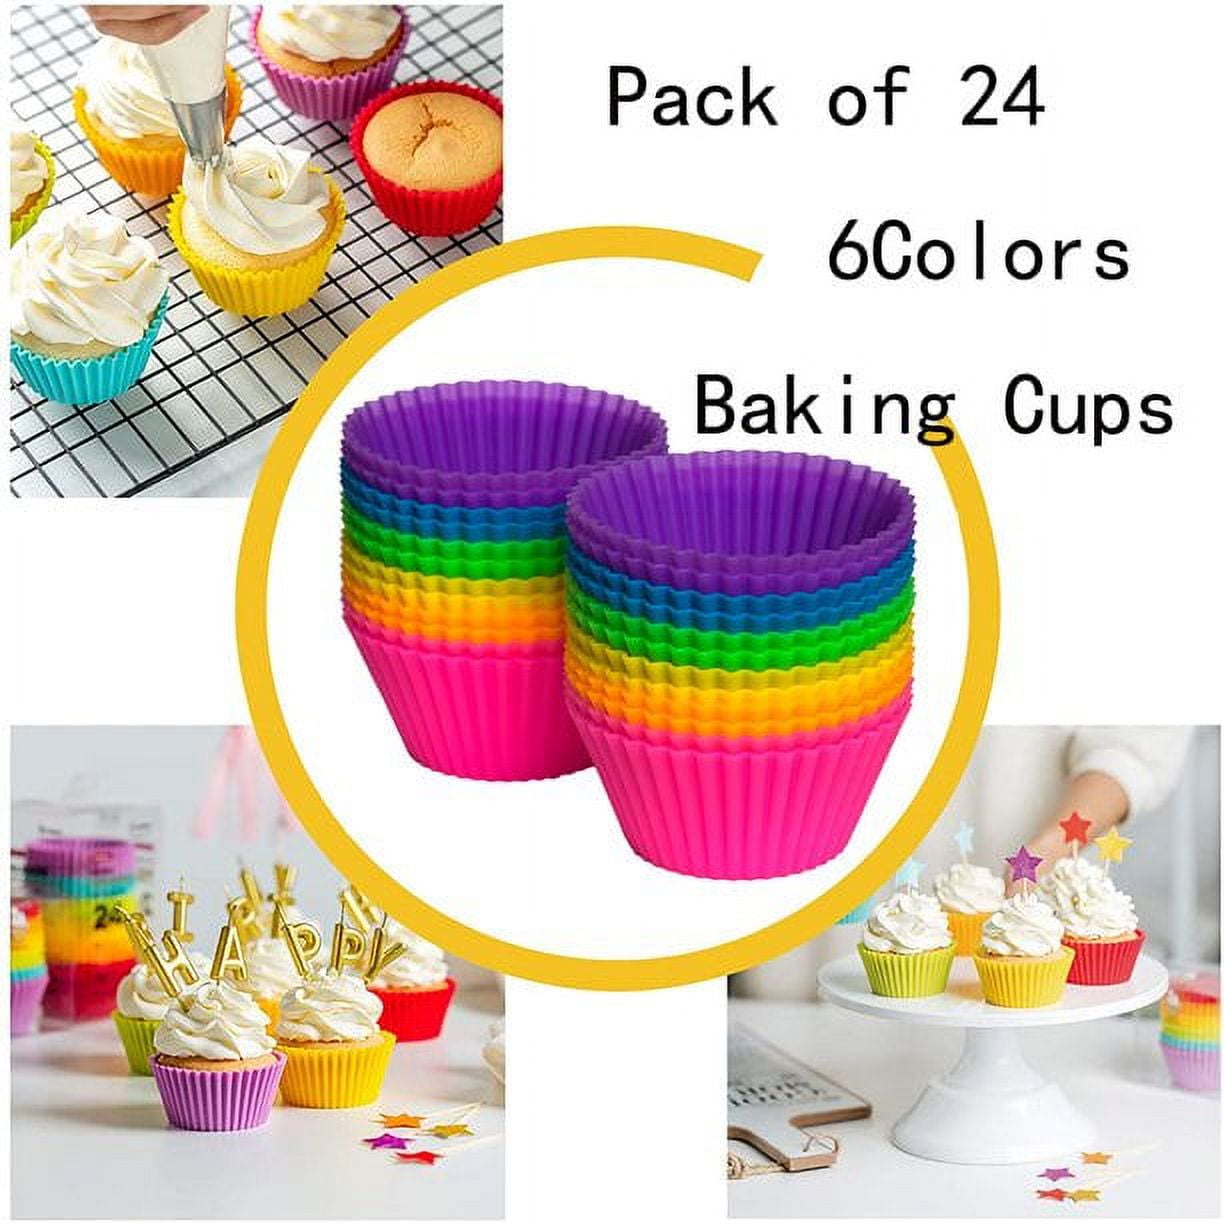  Lollipop Ice Cream French Fries Fondant Chocolate Mould  Cake-Topper Baking Tool Handmade-Soap Silicone Mold Easy Clean Chocolate  Moulds Different Shapes for Household Cute Soap Molds Silicone Shapes :  Home & Kitchen